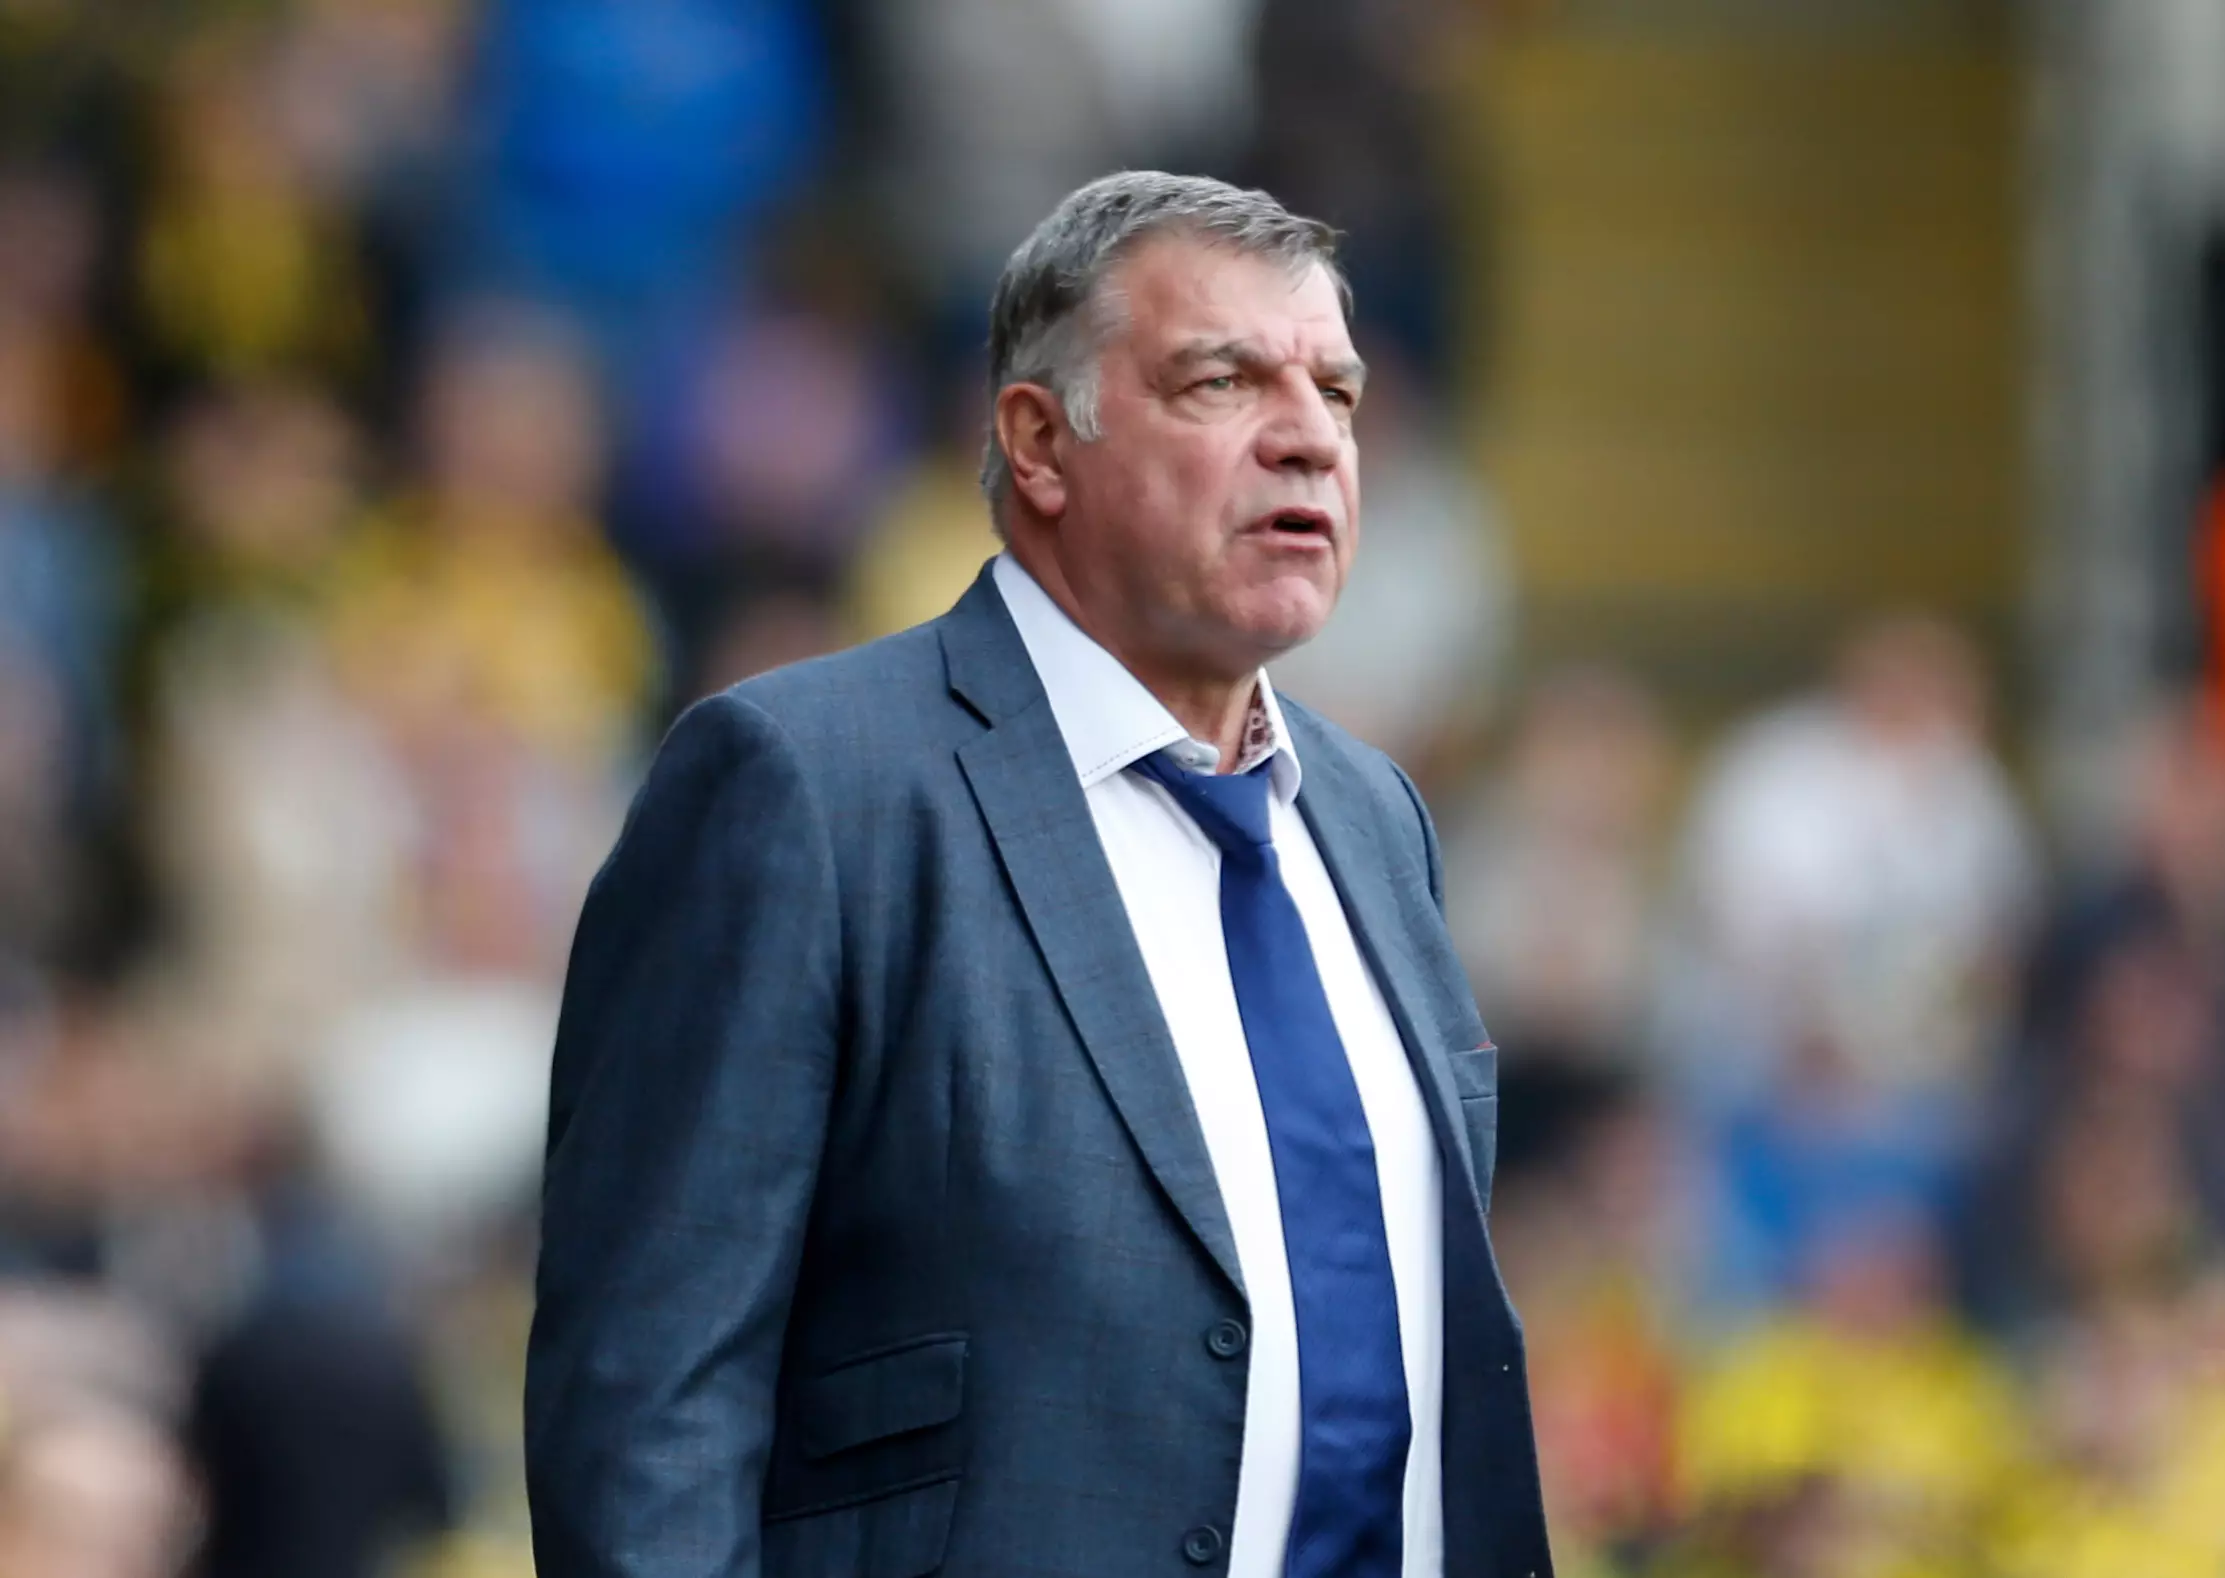 Everton fans have not fallen in love with Allardyce's ways. Image: PA Images